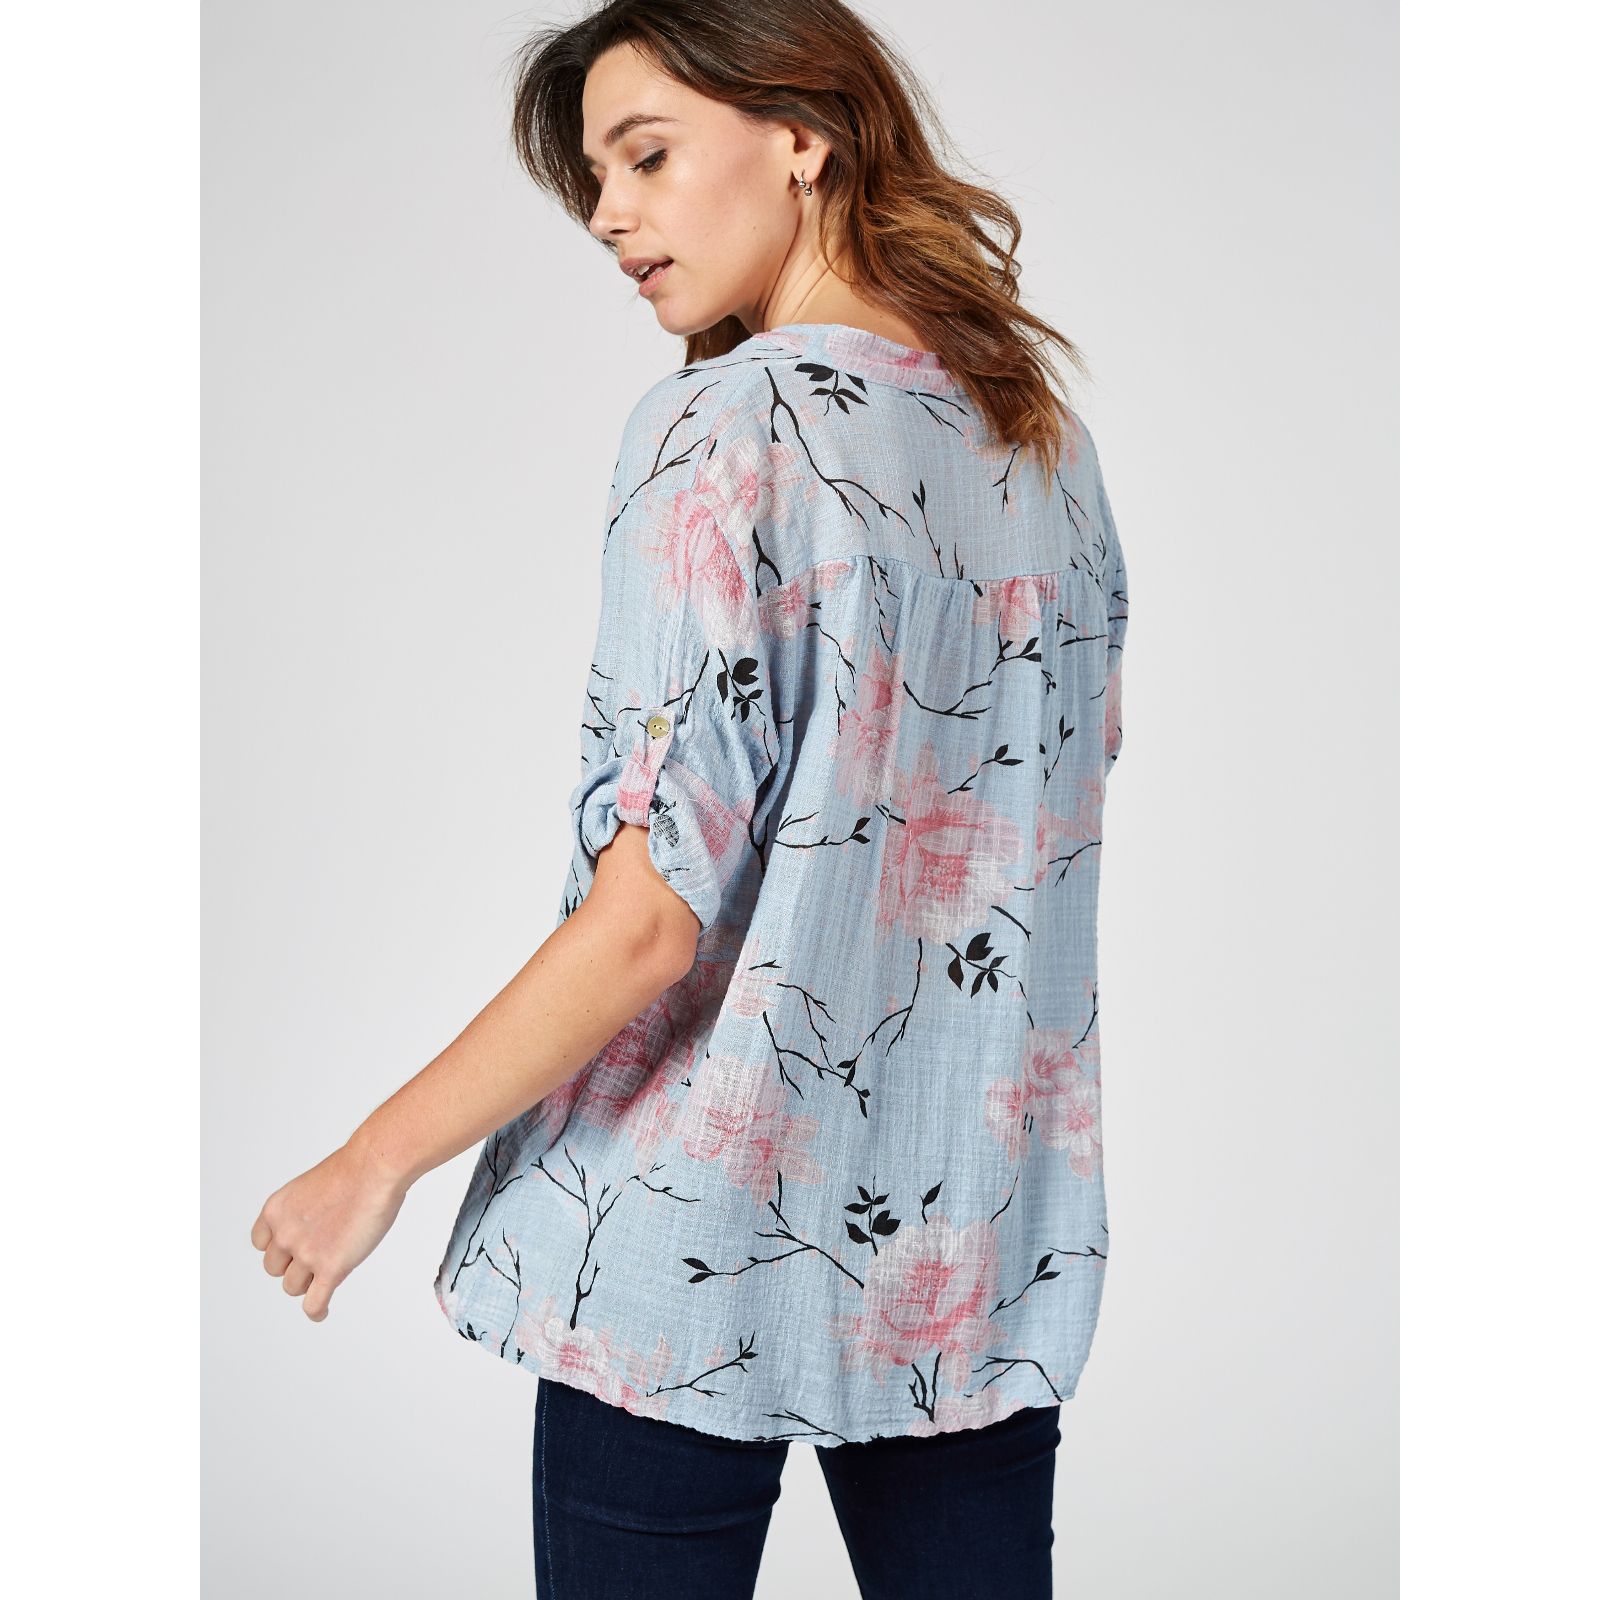 Outlet Lucca Vanucci Printed Elbow Length Shirt - QVC UK